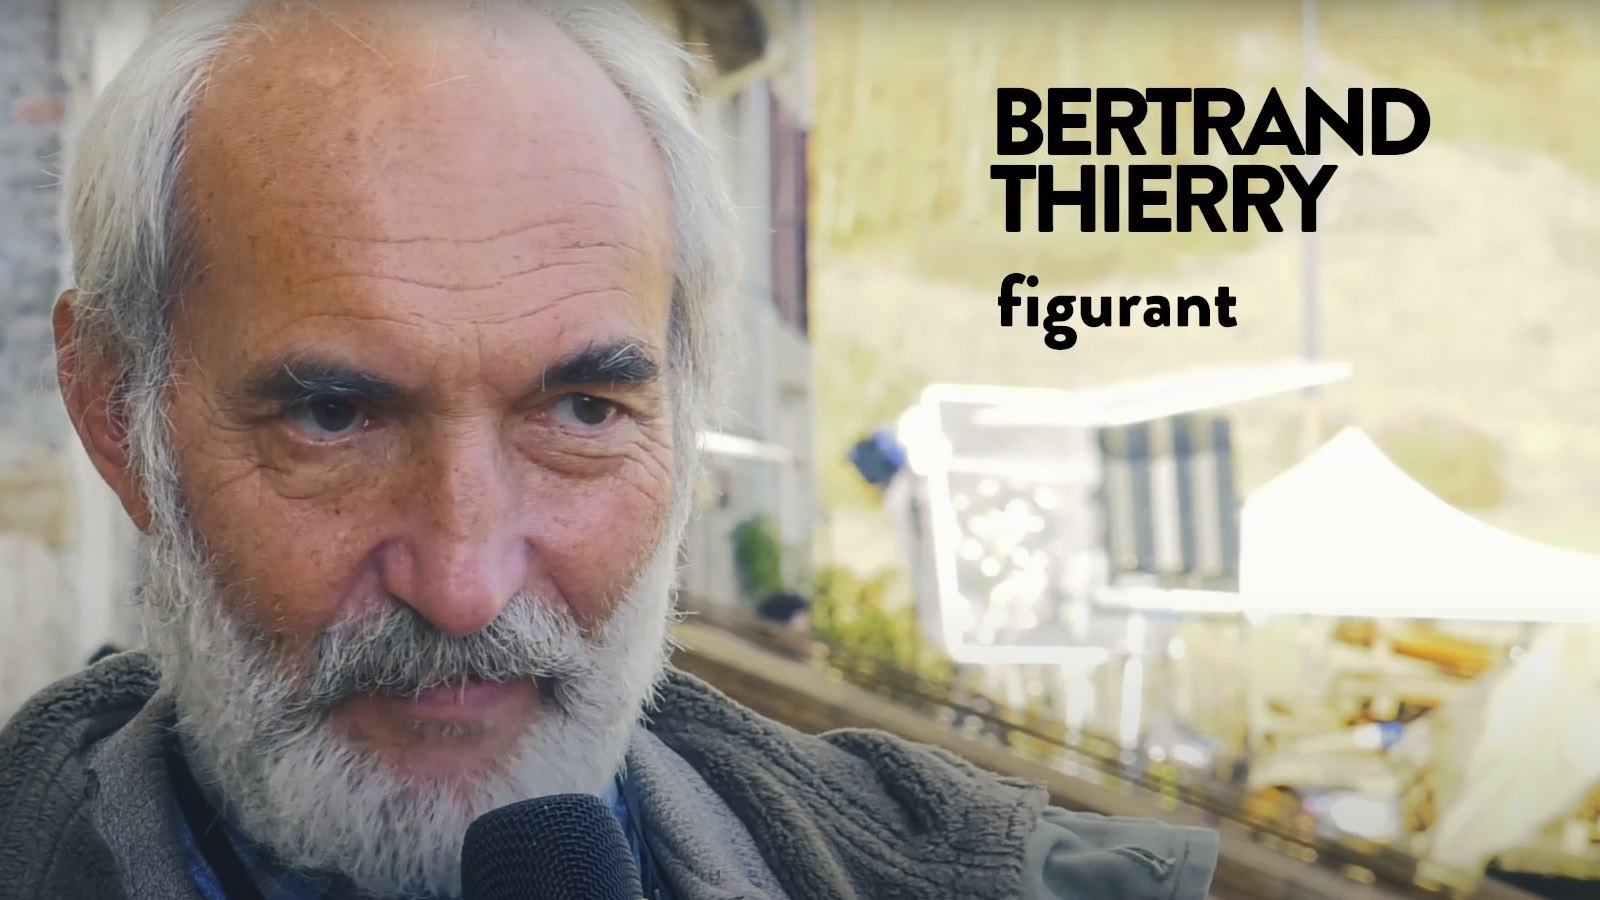 ITW - Bertrand Thierry, figurant